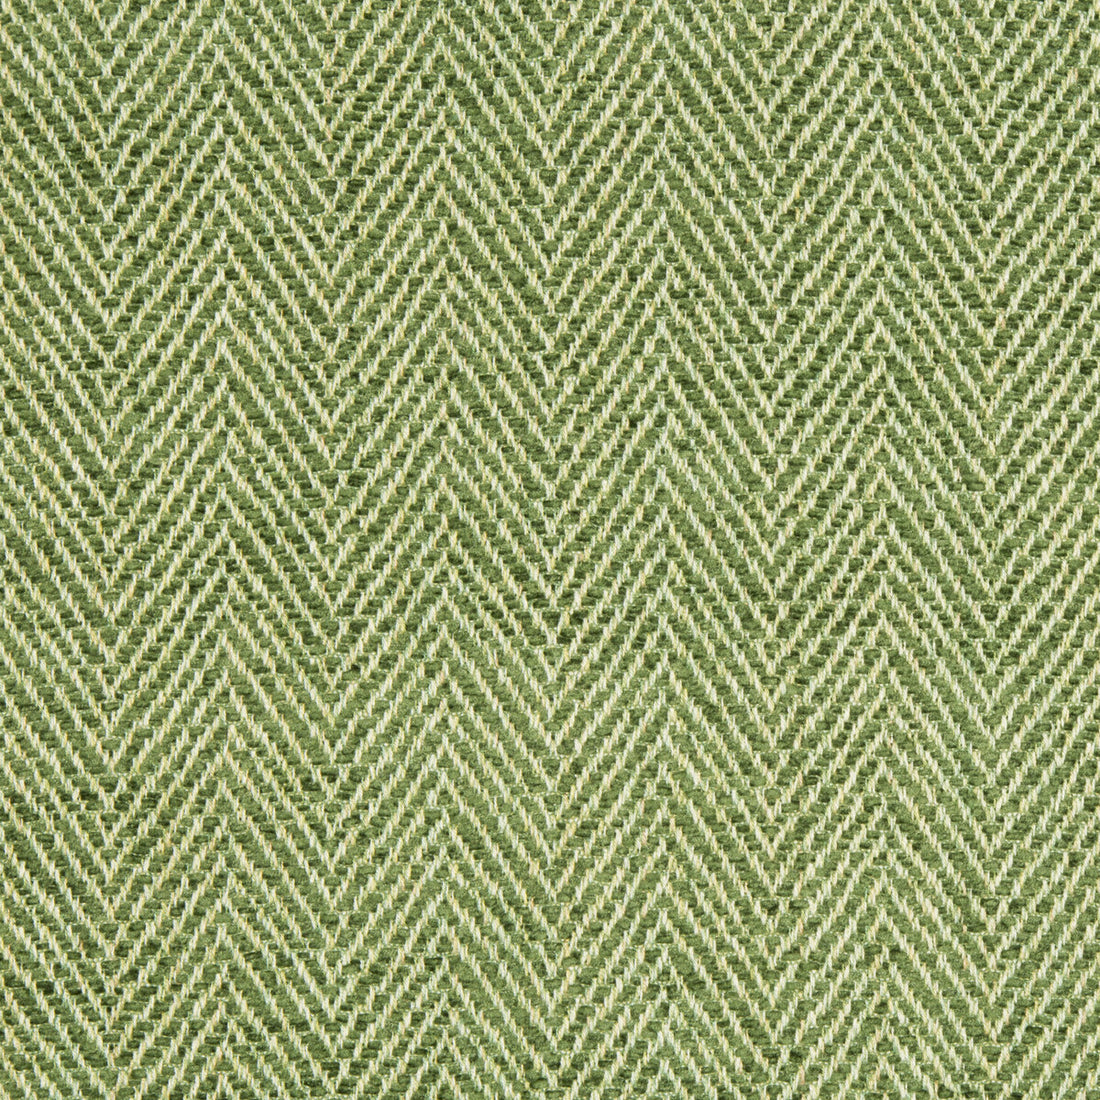 Firle Chenille II fabric in celery color - pattern 8017140.3.0 - by Brunschwig &amp; Fils in the Baronet collection